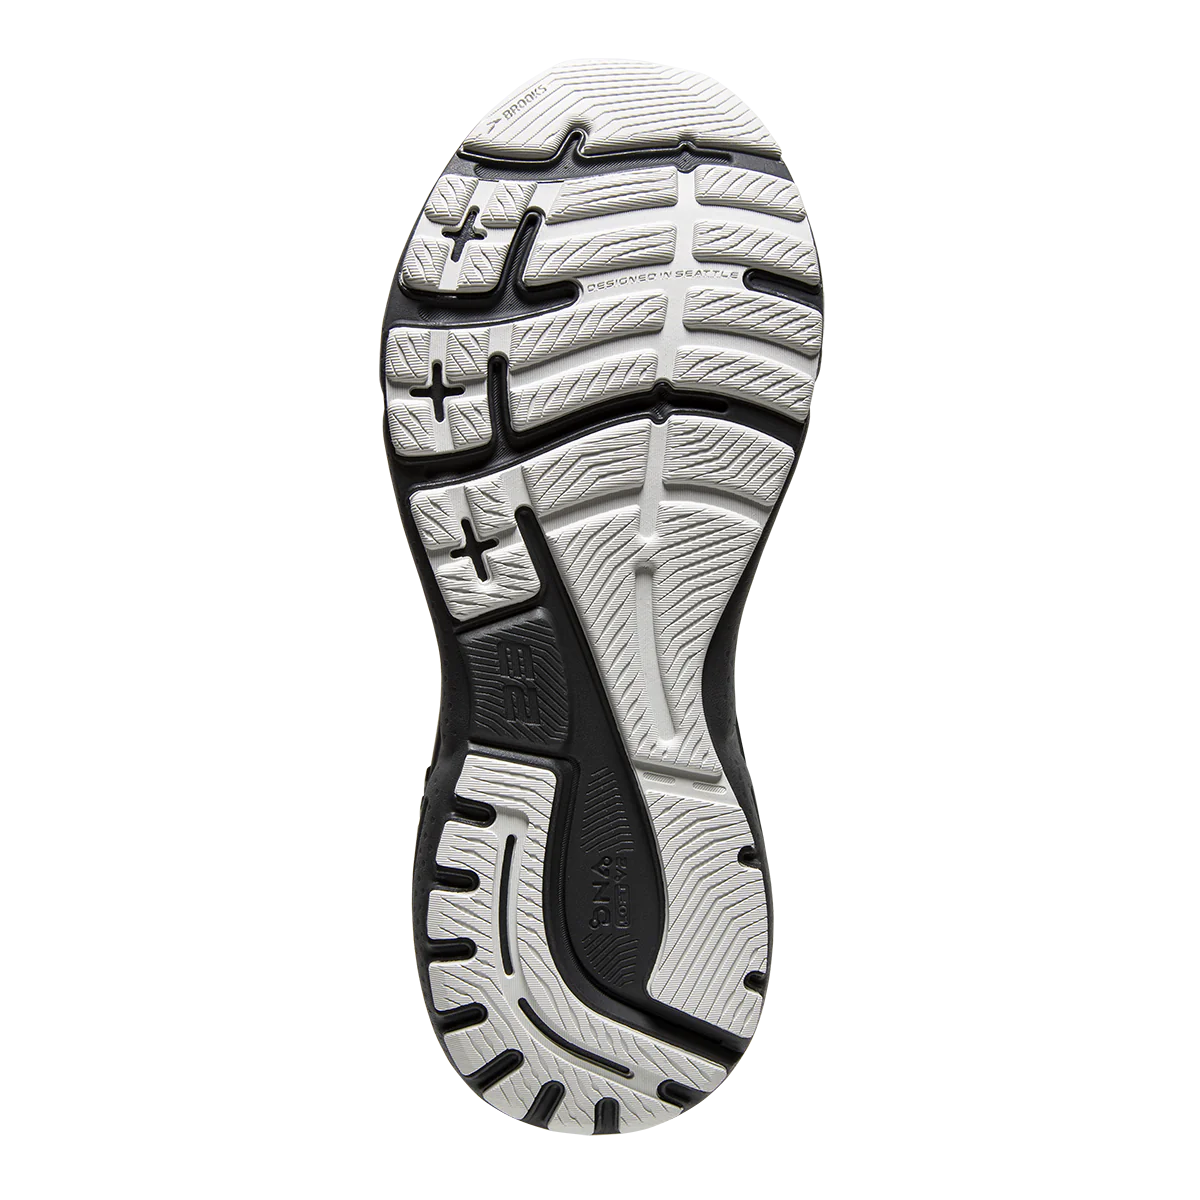 Bottom (outer sole) view of the Men's Adrenaline GTS 23 by Brooks in the color Black/Black/Ebony